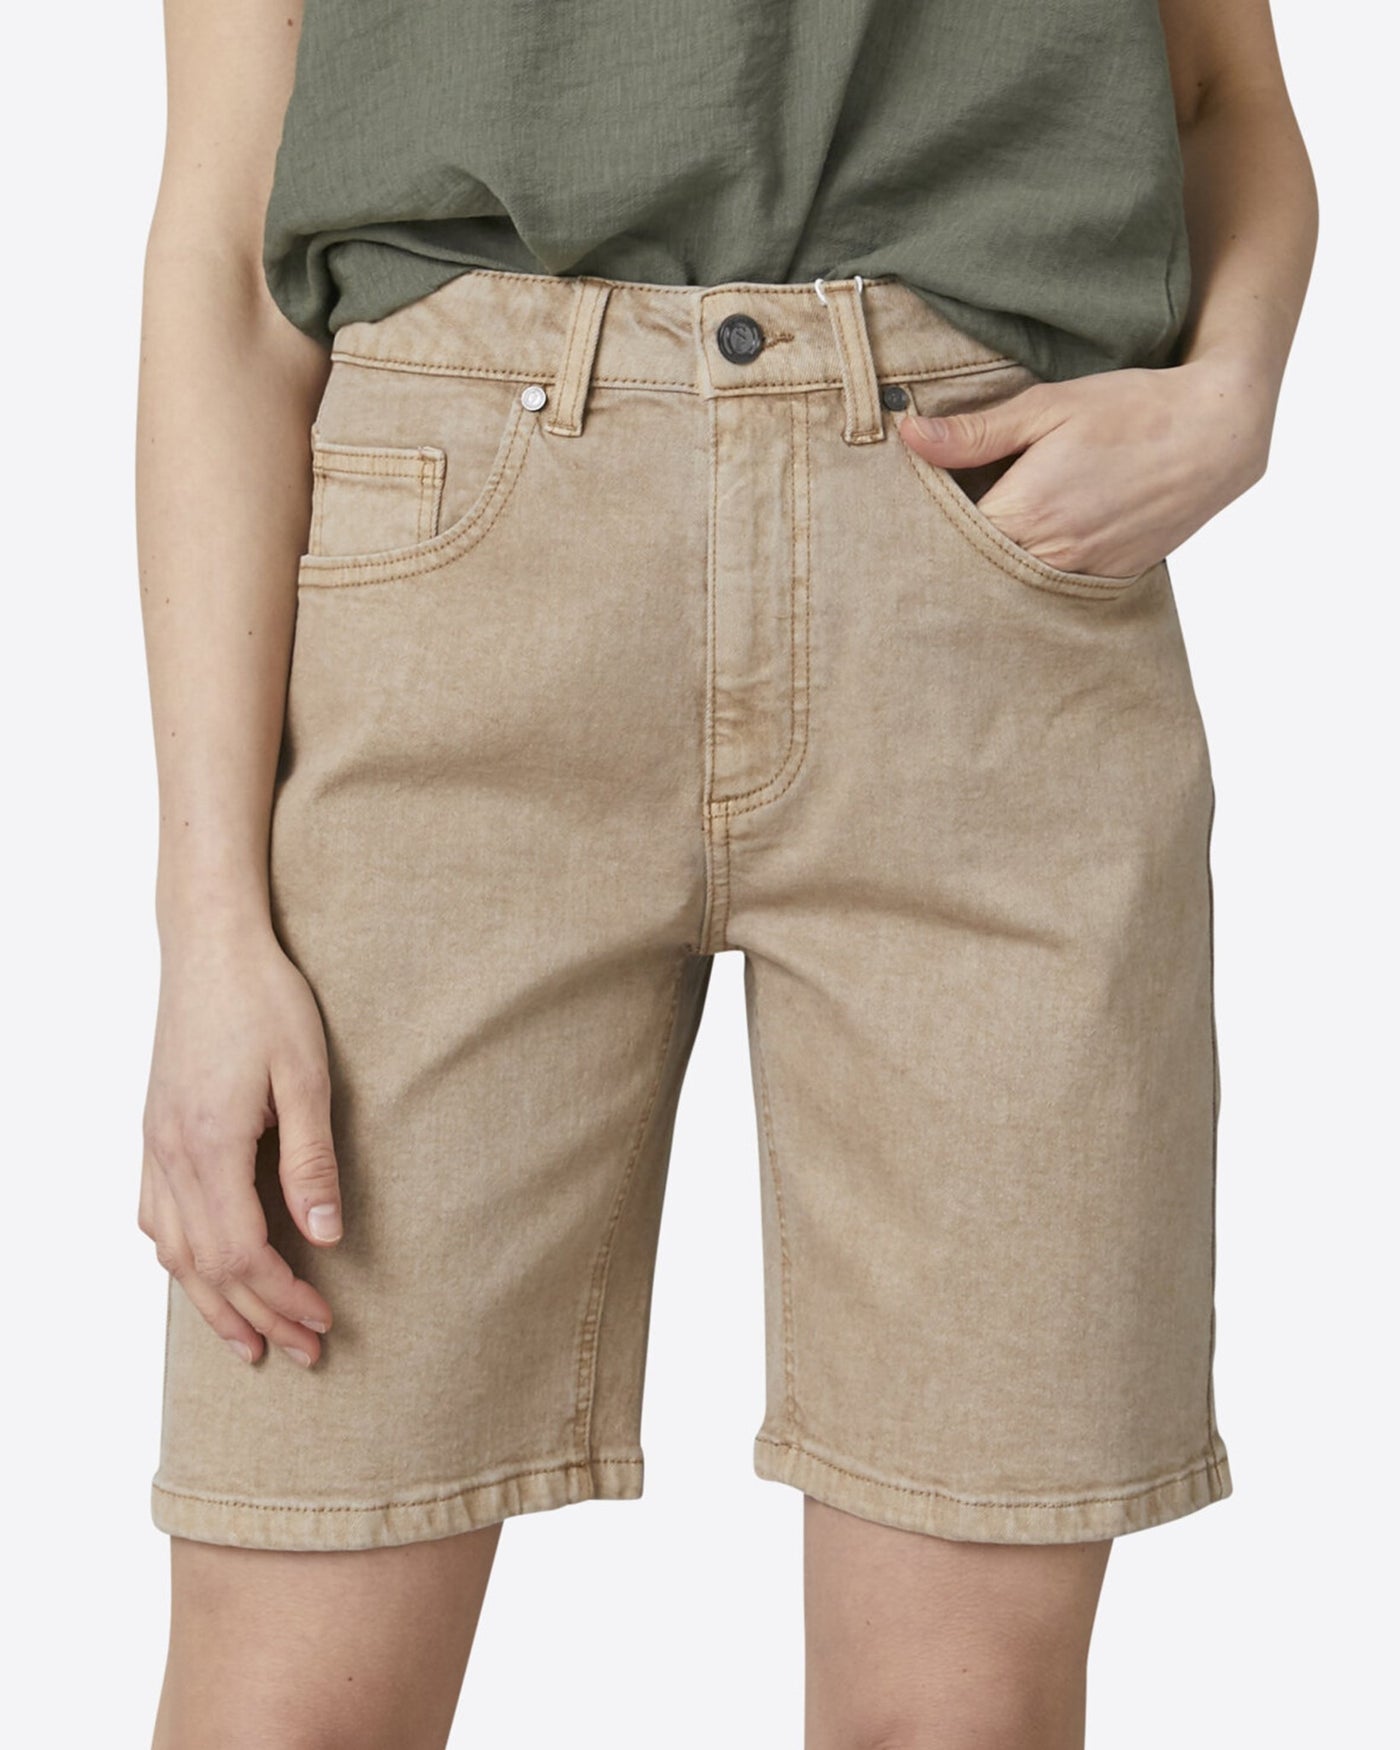 Owi Shorts - Sand - Sisters Point - Sand/Beige